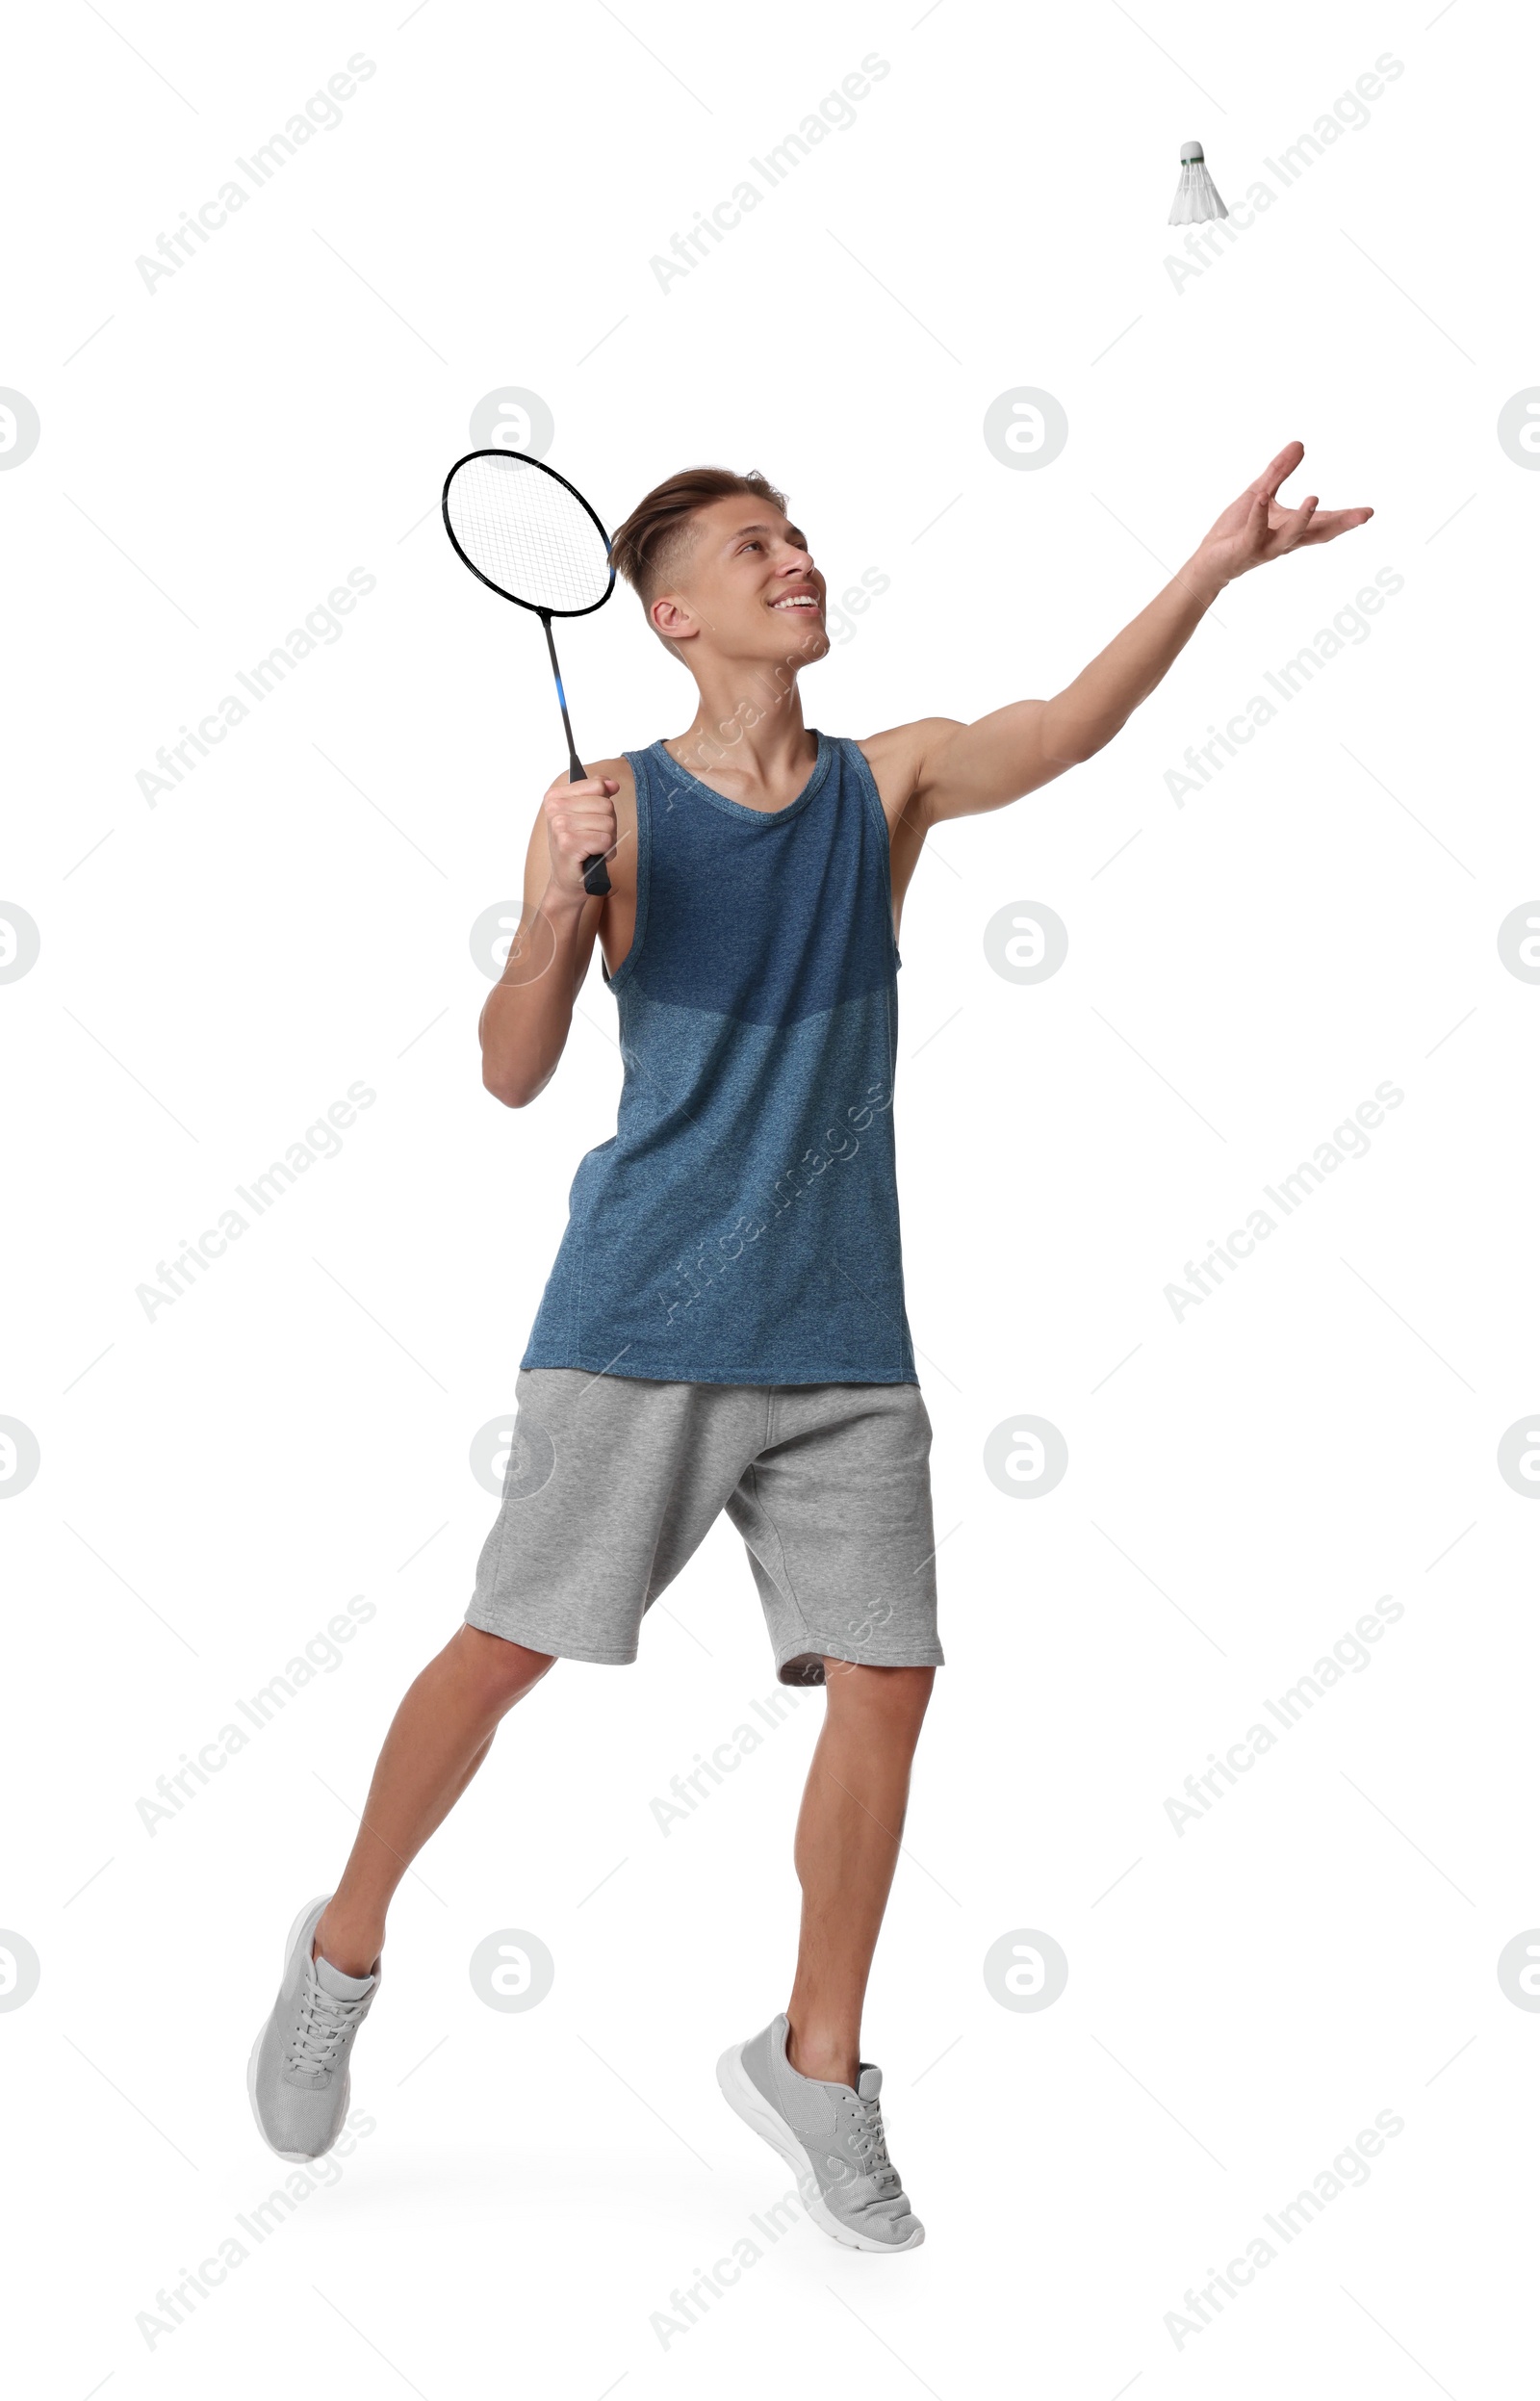 Photo of Young man playing badminton with racket and shuttlecock on white background